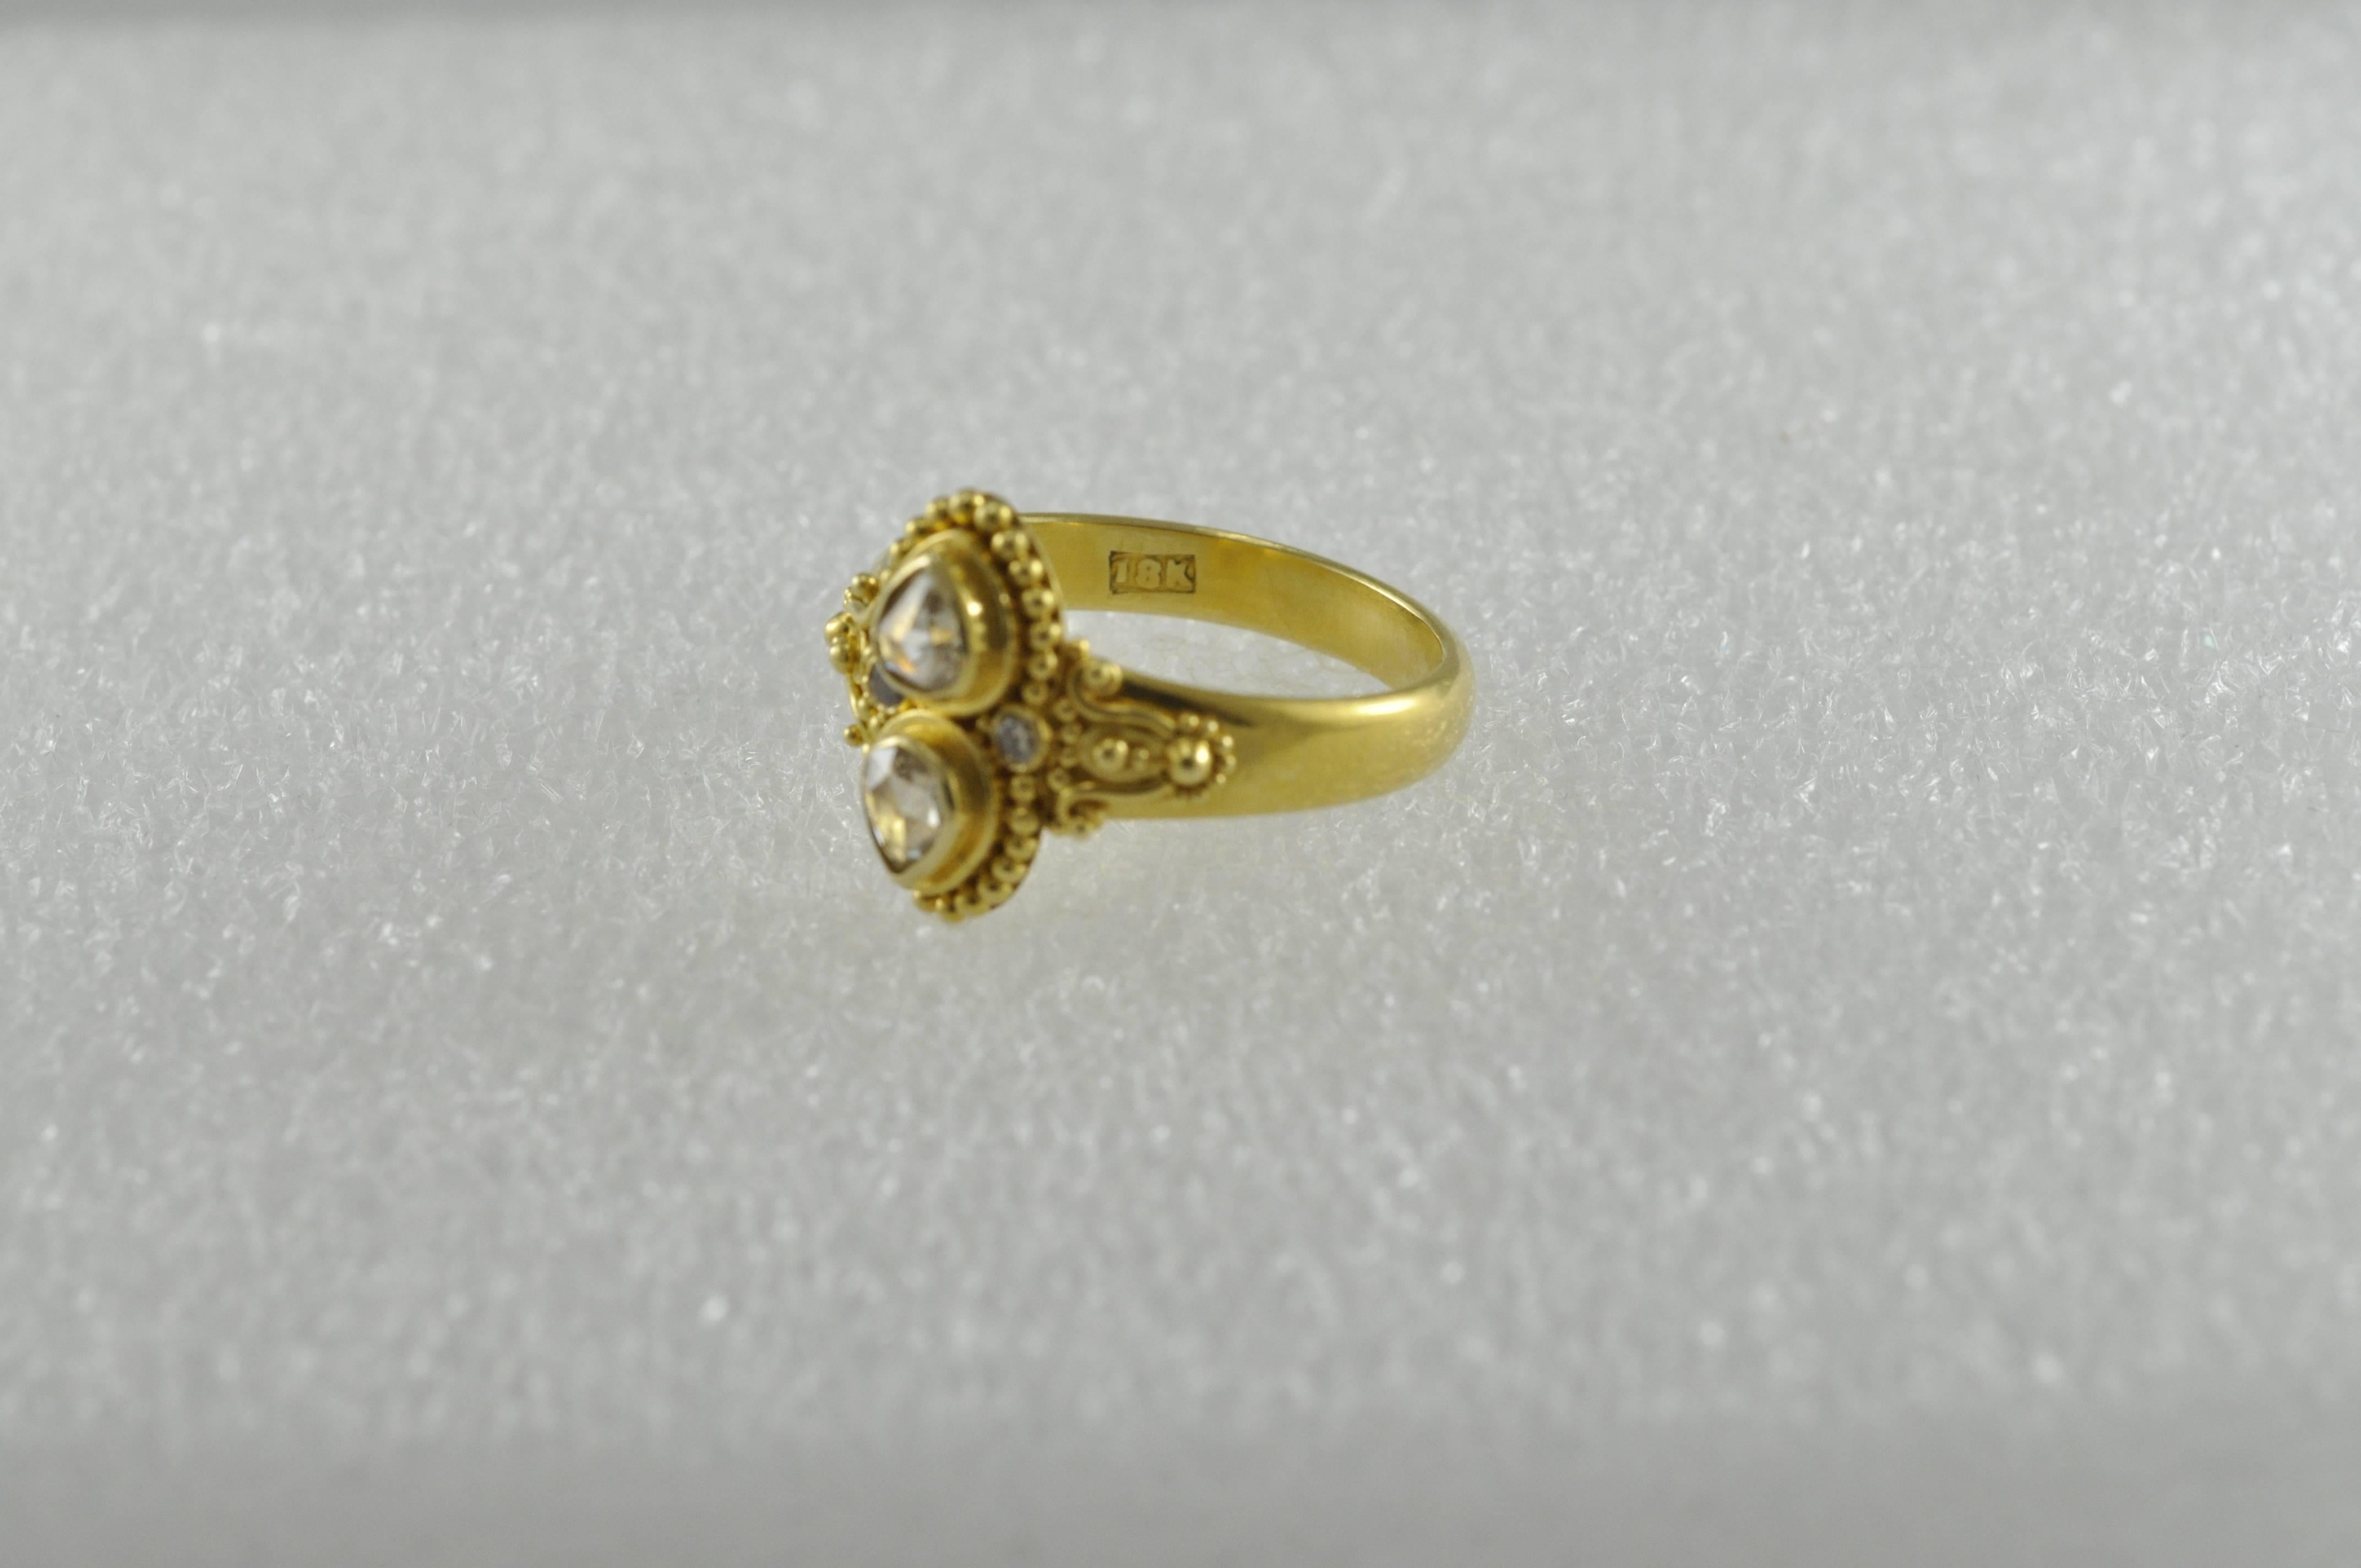 Dainty, gorgeous ring from Kimarie.  18K Gold Champagne Diamond Ring.  
6 3/4 finger size, we can size to fit. 18kt/22kt. Gold – bezel set rose cut champagne colored bezel diamonds with two round full cut melee diamonds on either side, .30cts.